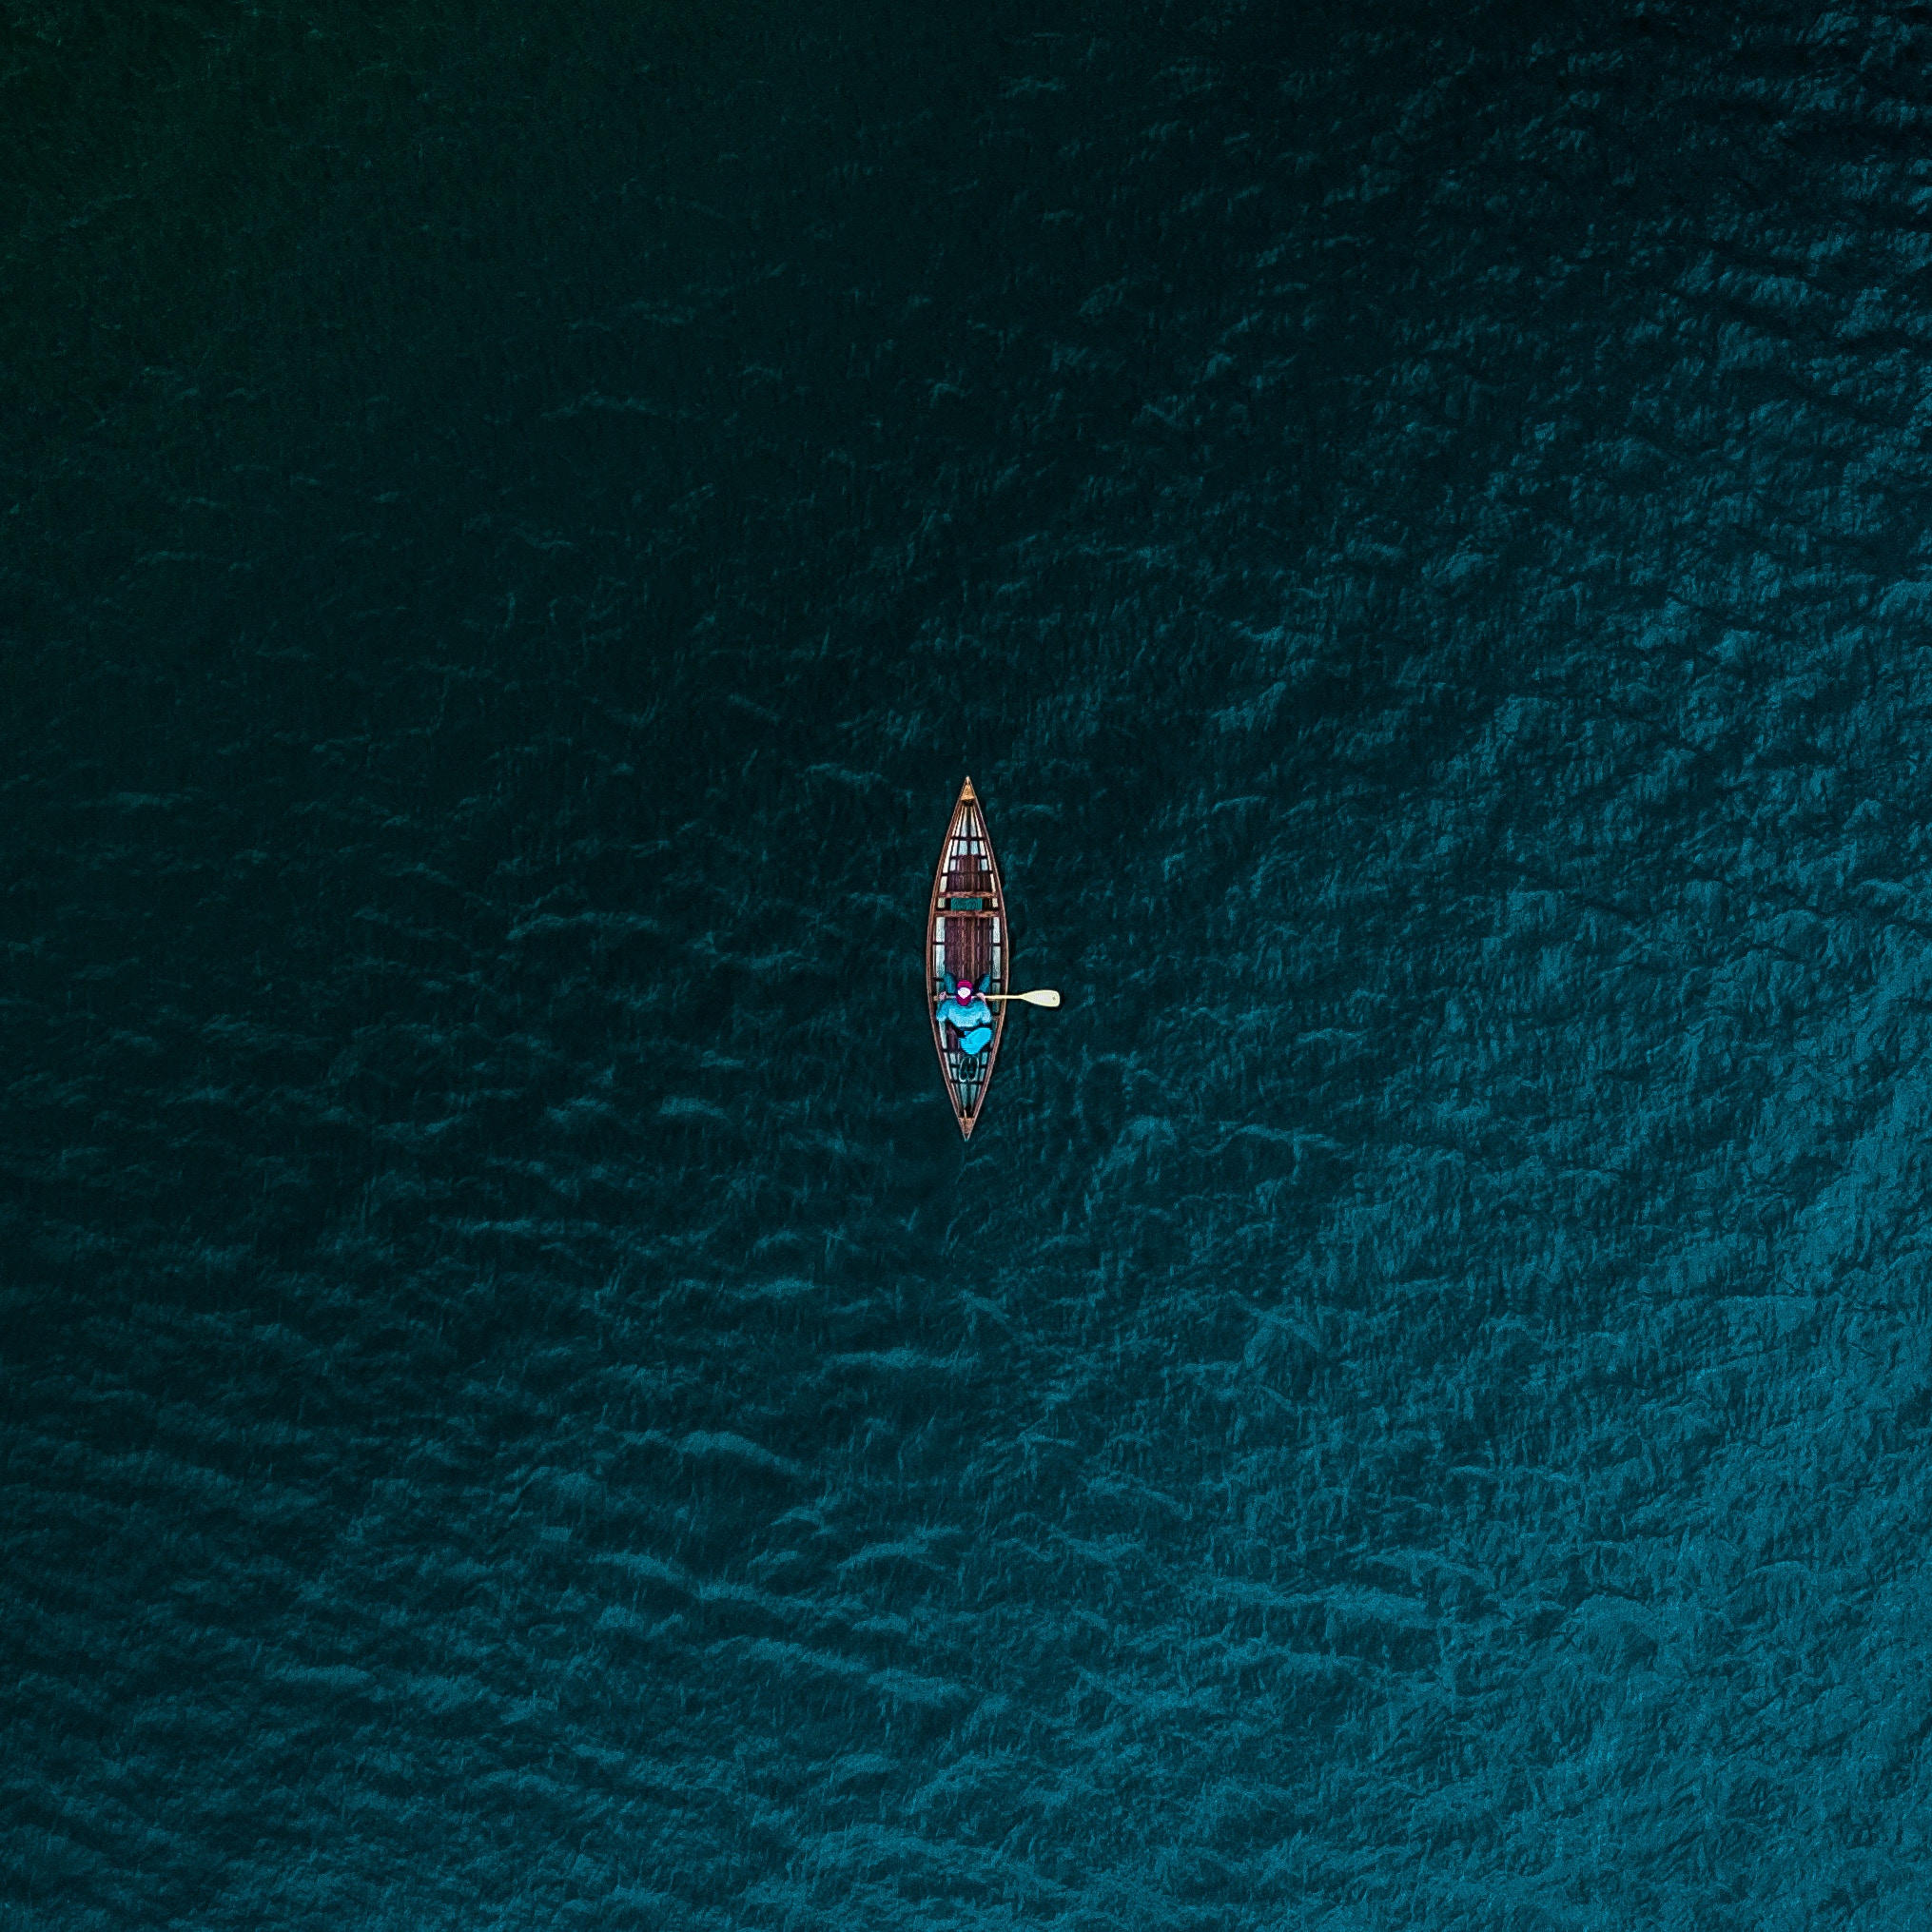 android water, minimalism, view from above, sea, boat